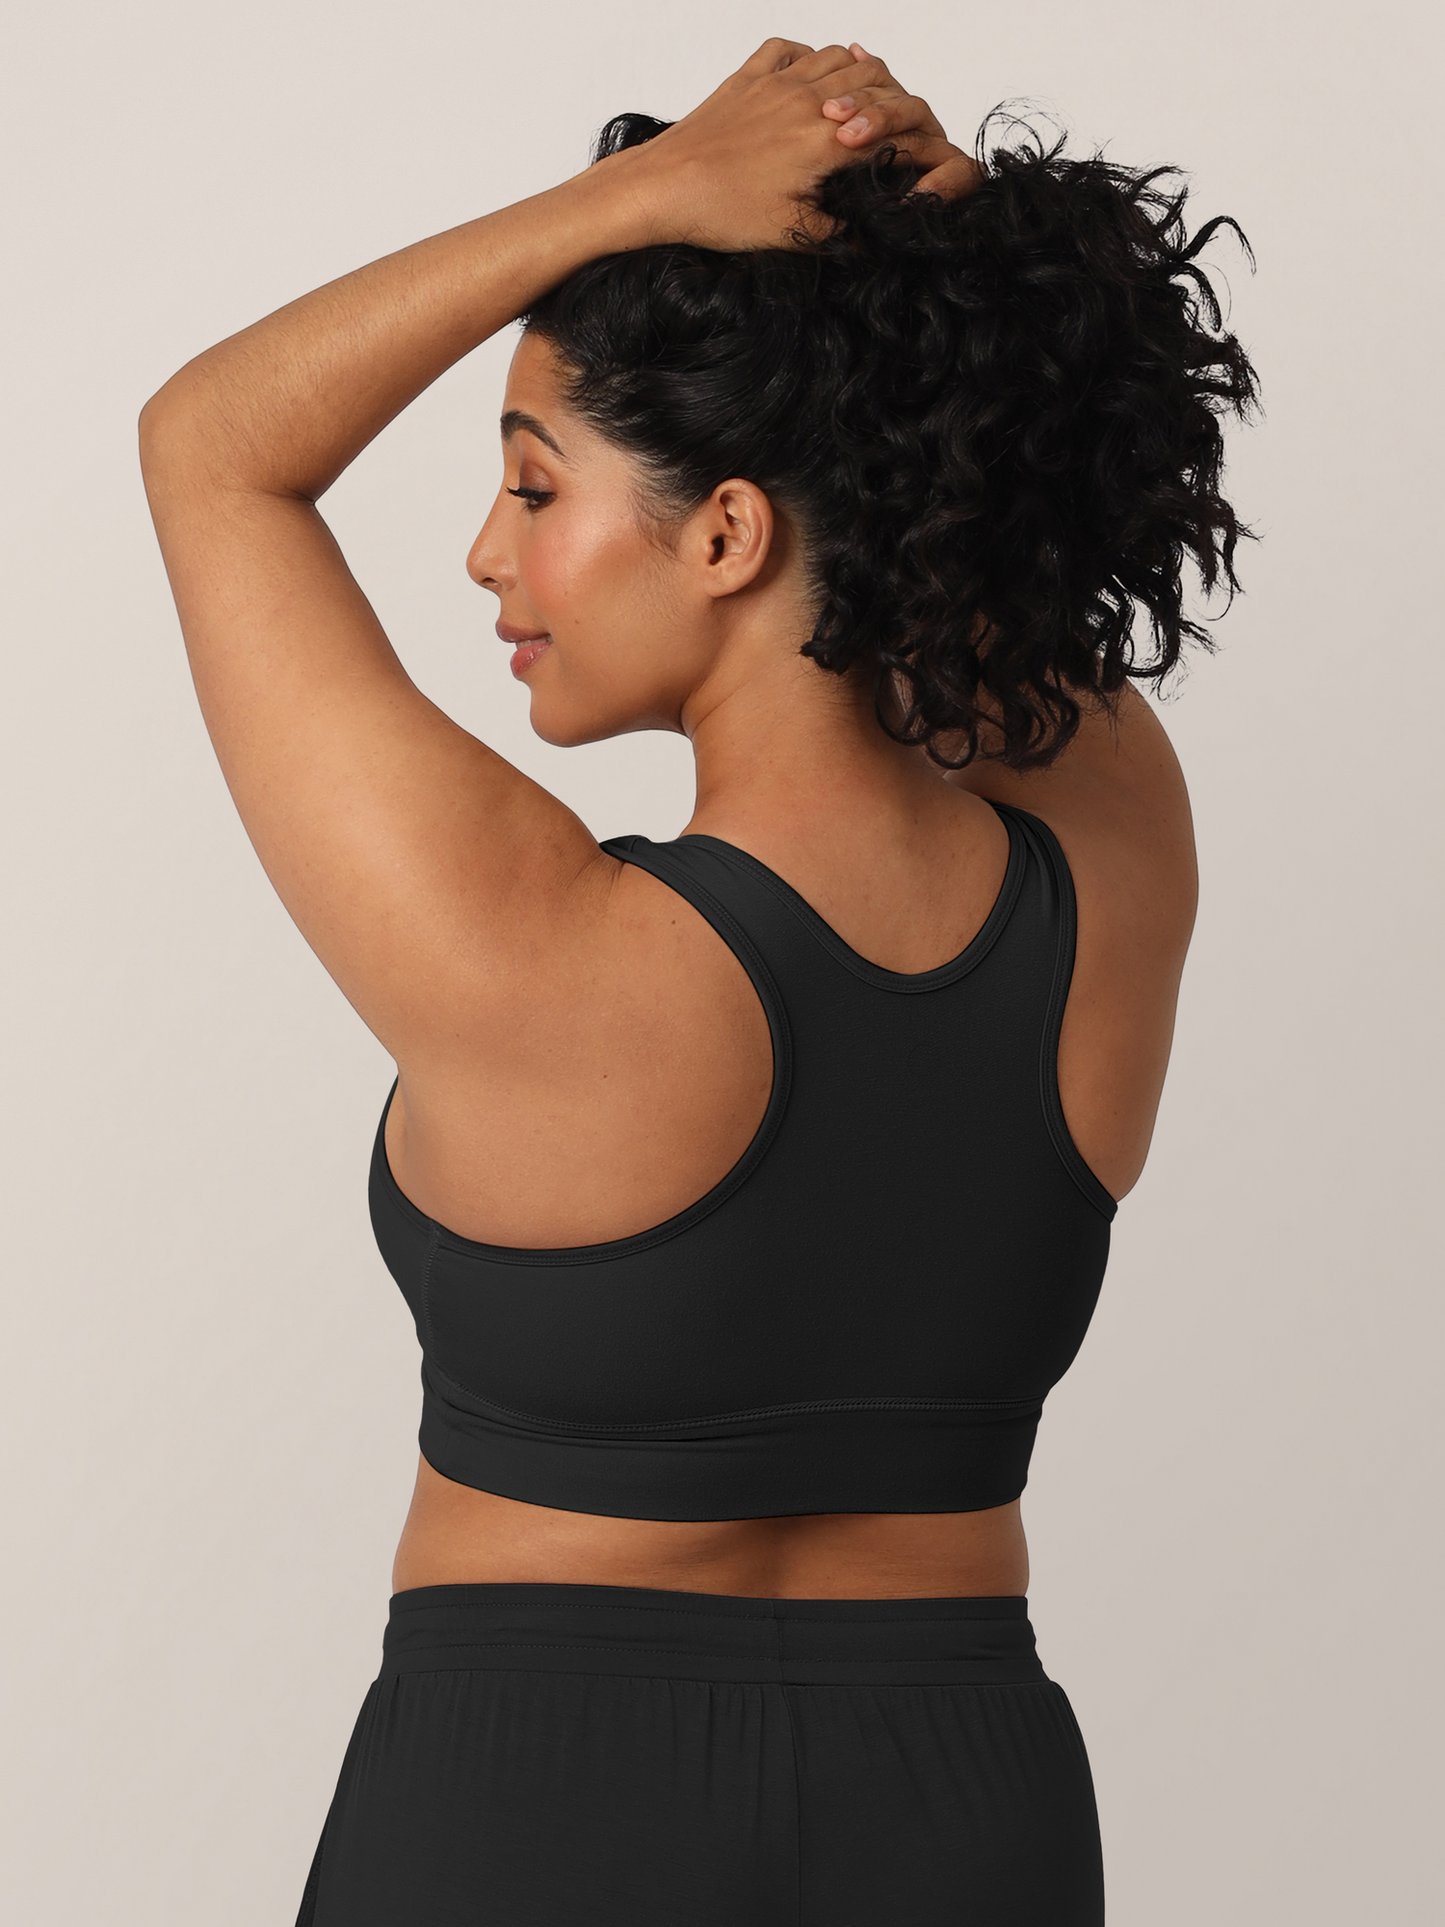 Back view of model wearing the French Terry Nursing Bra in Black and holding her hair up to show the racerback detail.